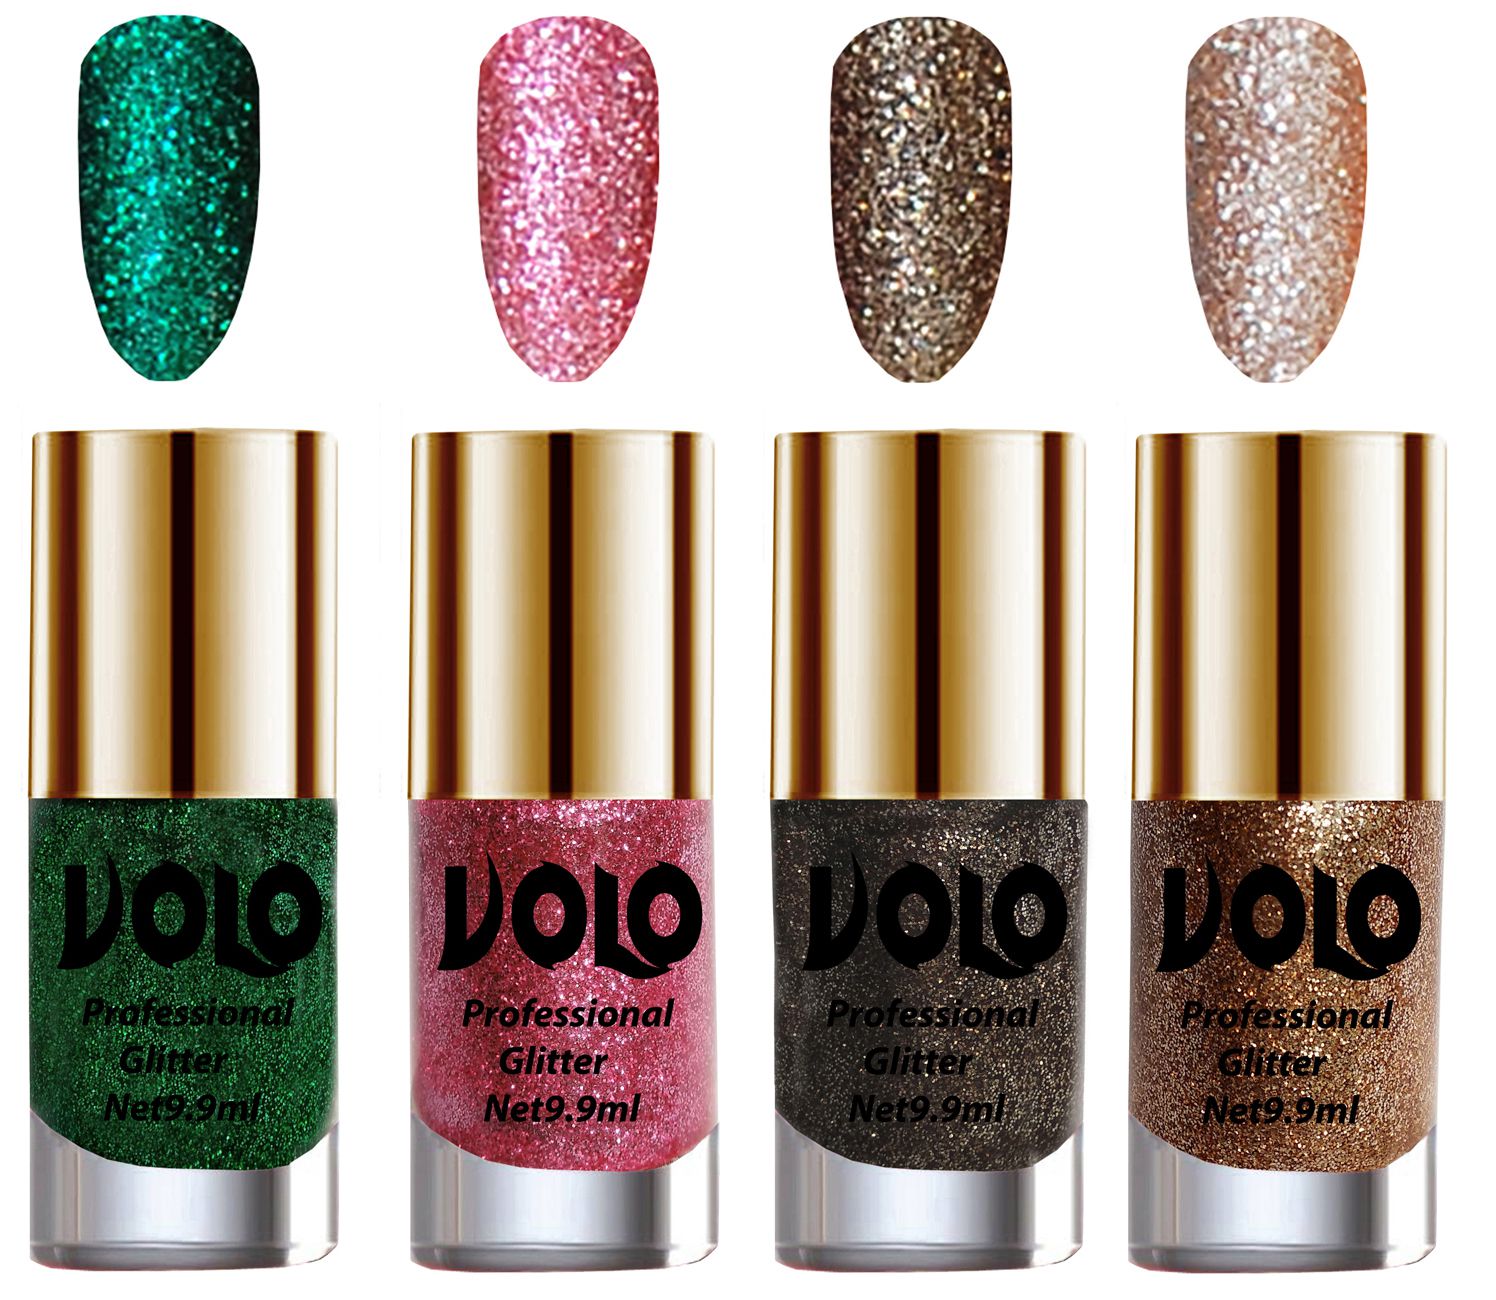     			VOLO Professionally Used Glitter Shine Nail Polish Green,Pink,Grey Gold Pack of 4 39 mL